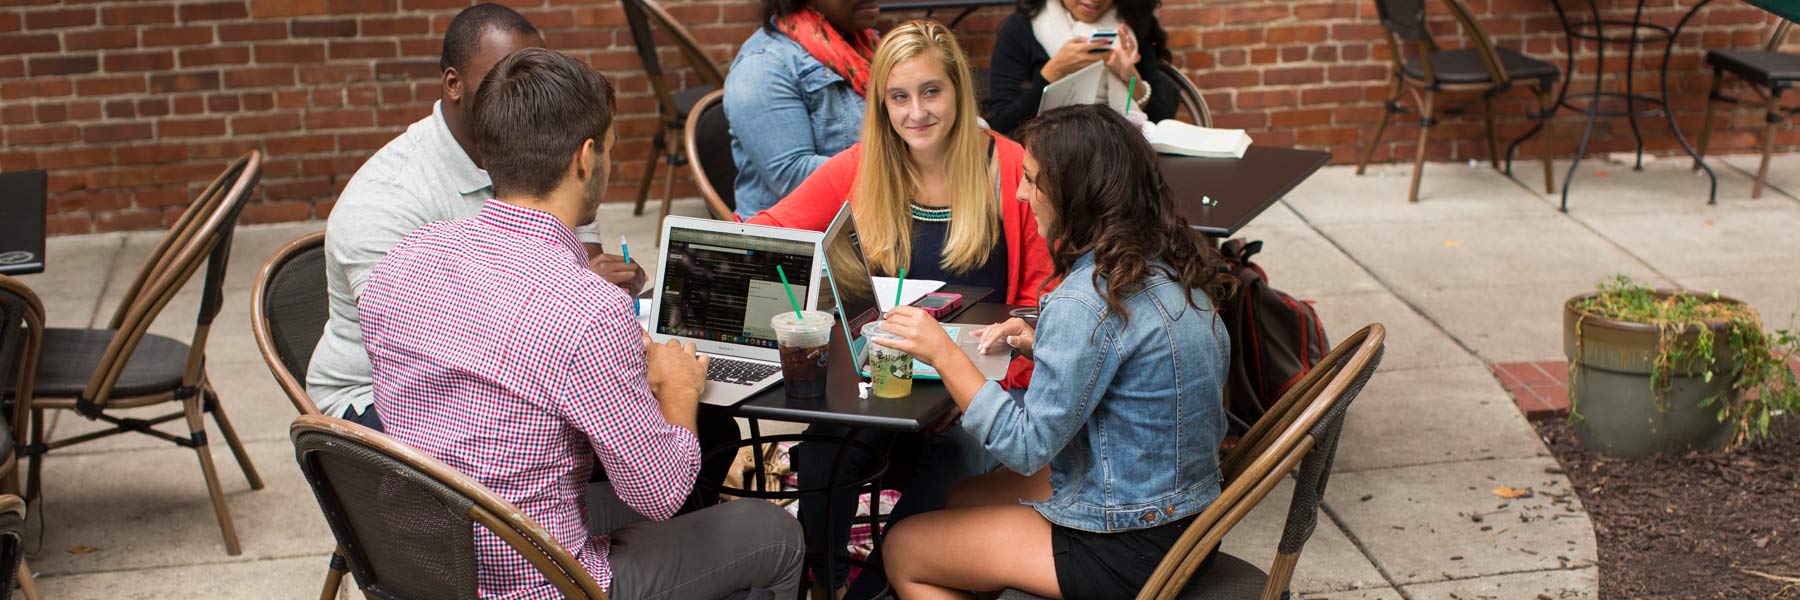 A group of students discuss college in an outdoor courtyard.